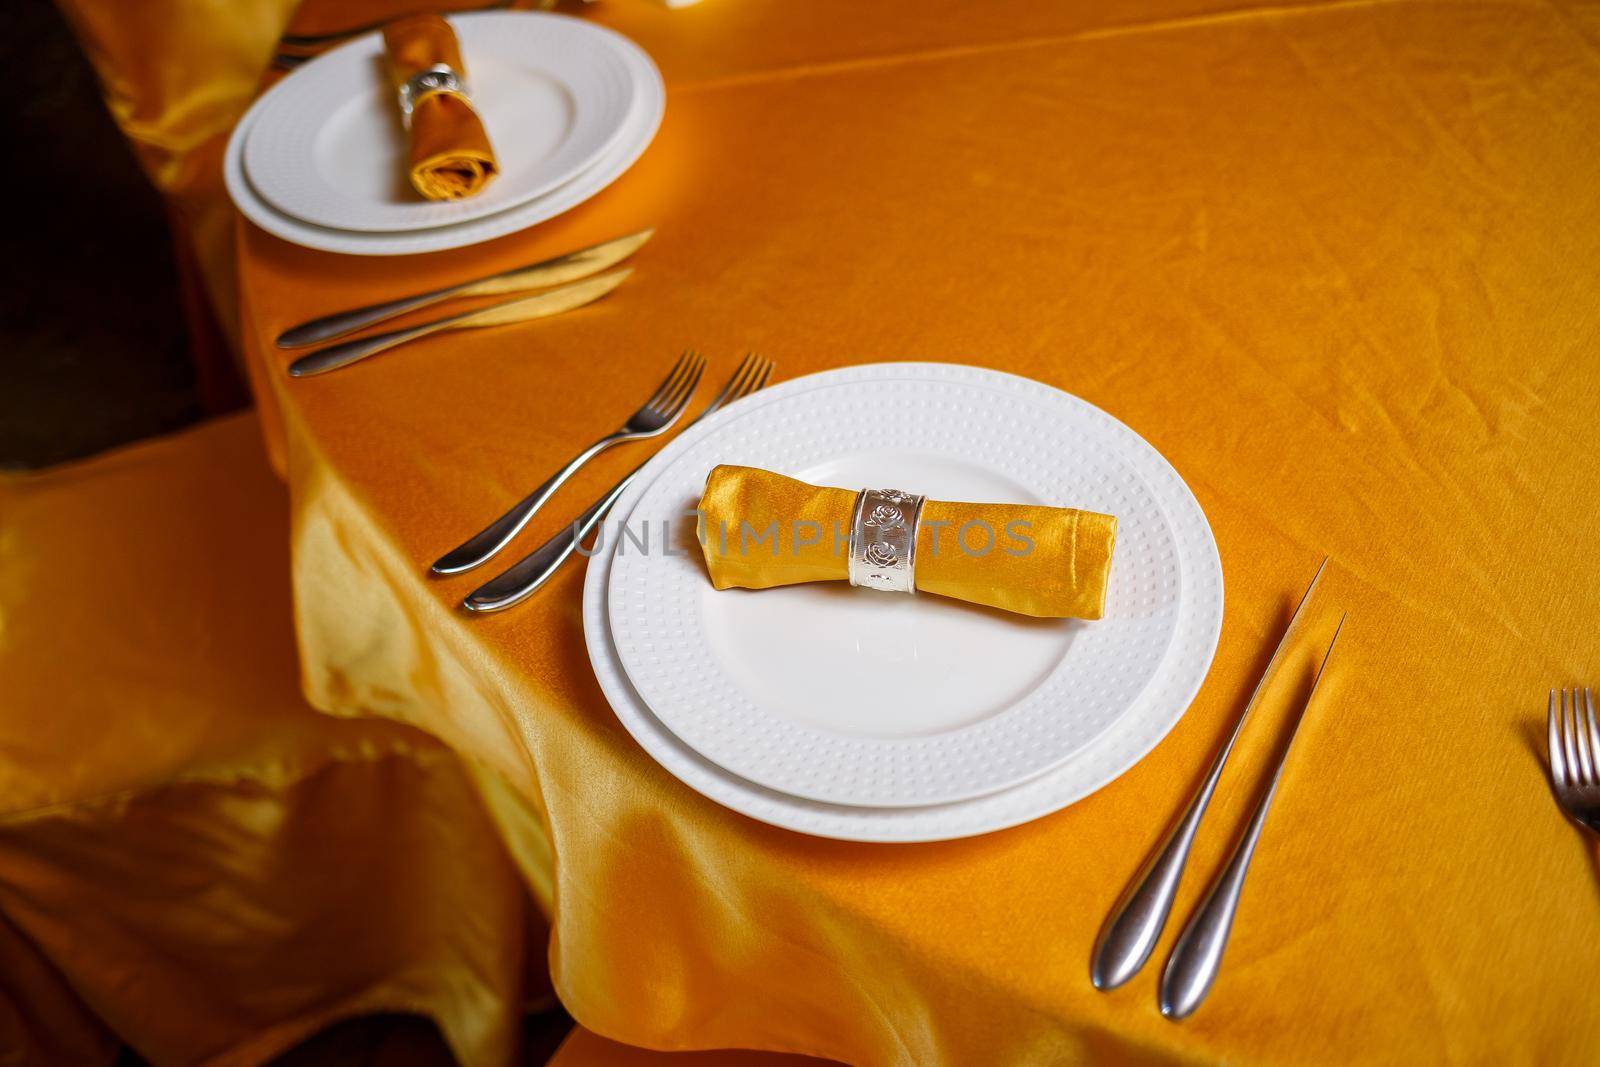 Elegant table setting with fork, knife and gold napkin